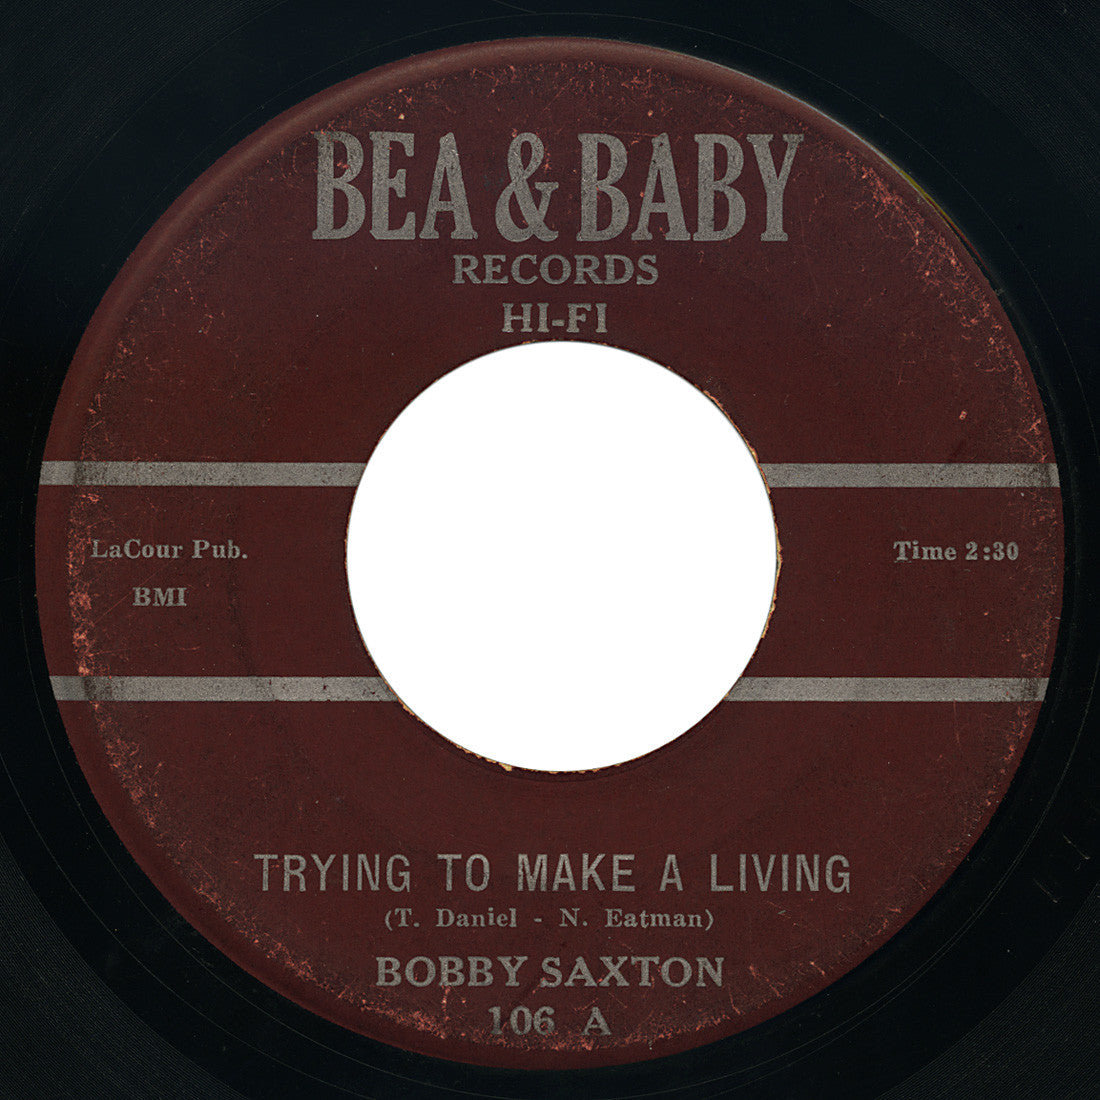 Bobby Saxton – Trying To Make A Living – Bea & Baby